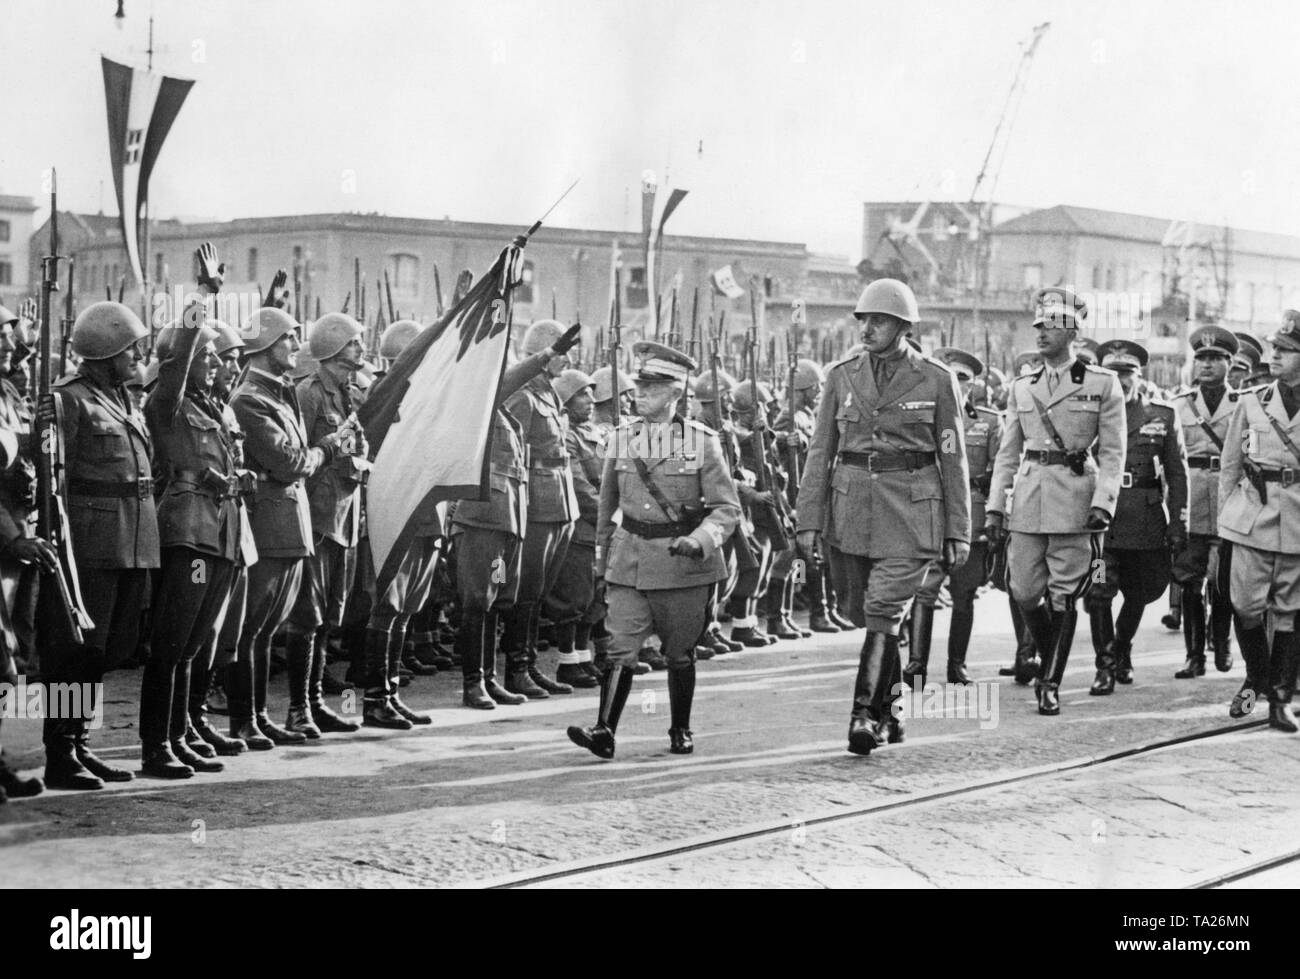 10,000 Italian soldiers, who fought as volunteers on the side of the Franco troops in the Spanish Civil War, are received in the Port of Naples on October 21, 1938. From left to right: King Victor Emmanuel III of Italy, commander of the Legion of General Mario Berti (with steel helmet), Crown Prince Umberto of Savoy (1946, as Umberto II last king of Italy), Gian Galeazzo Ciano (Mussolini's father-in-law, Foreign Minister). On the left, soldiers salute the reception committee with a standard. Stock Photo